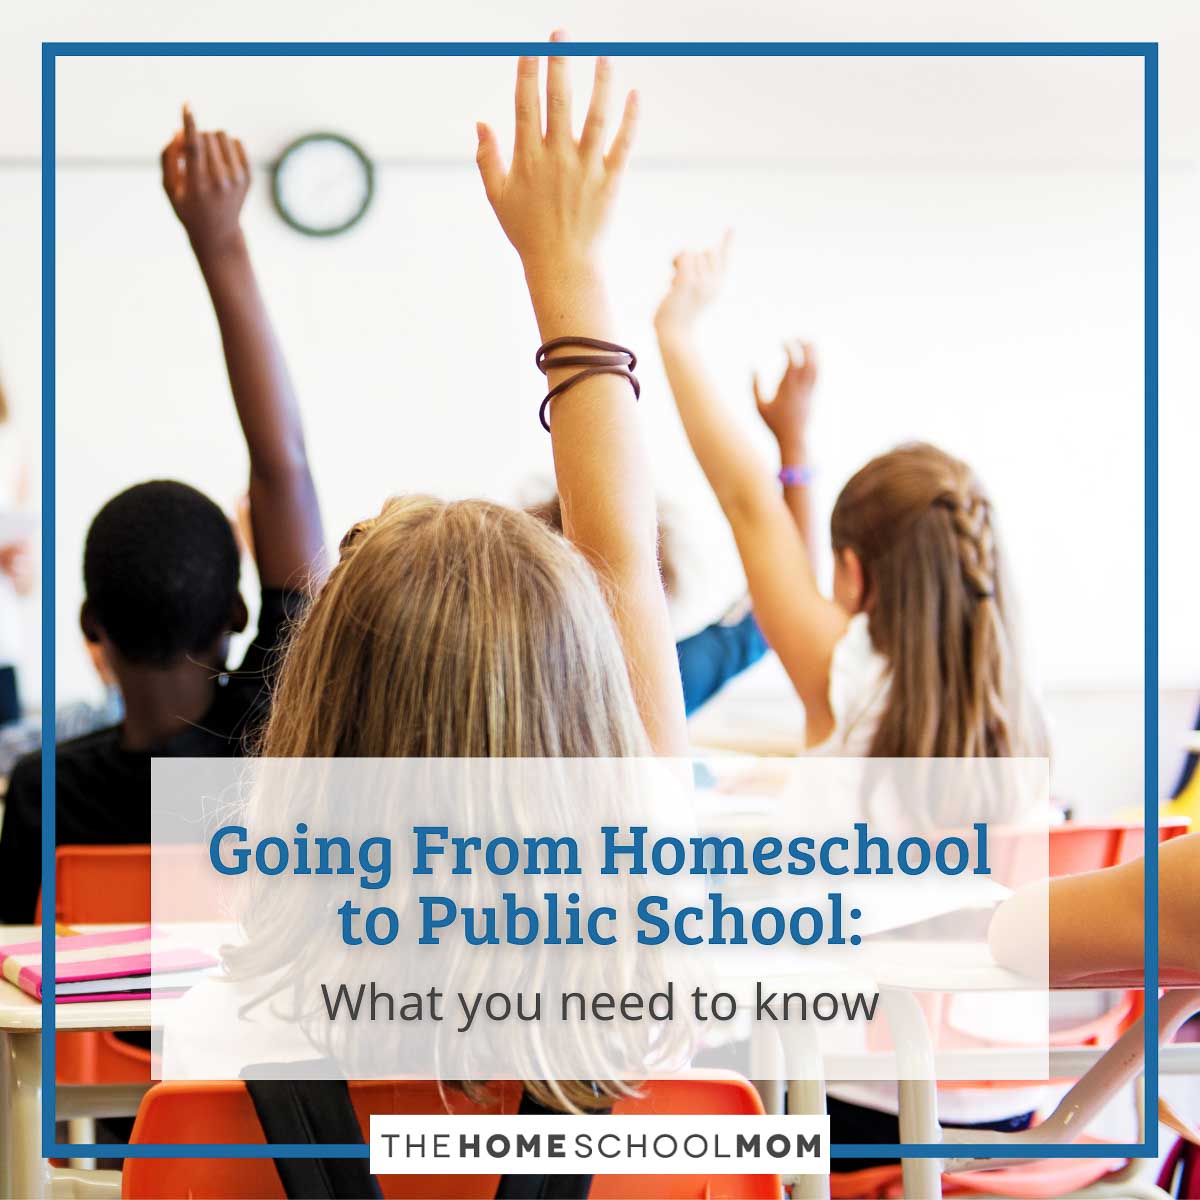 Going from homeschool to public school: what you need to know.